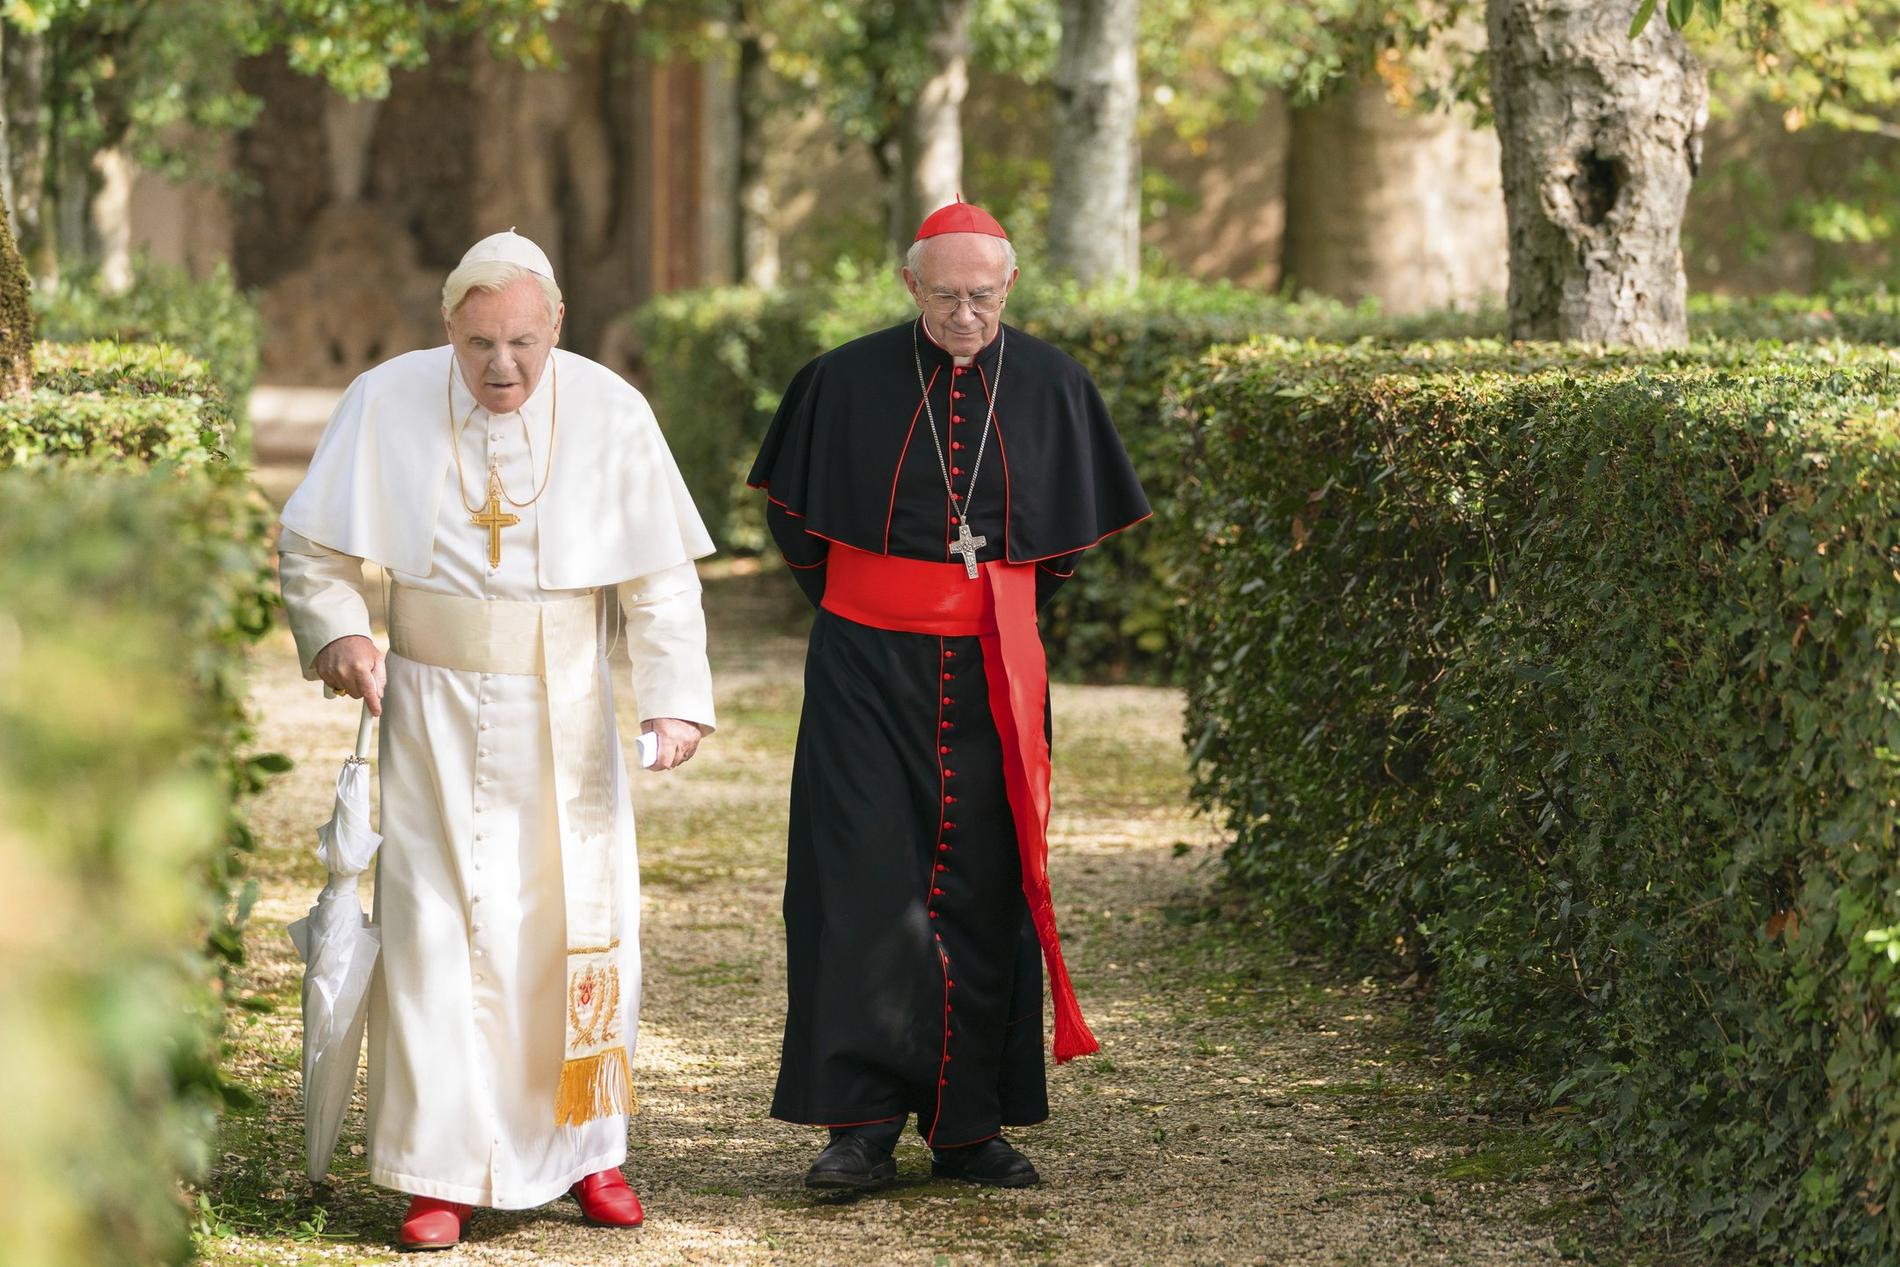 ”The two popes”.